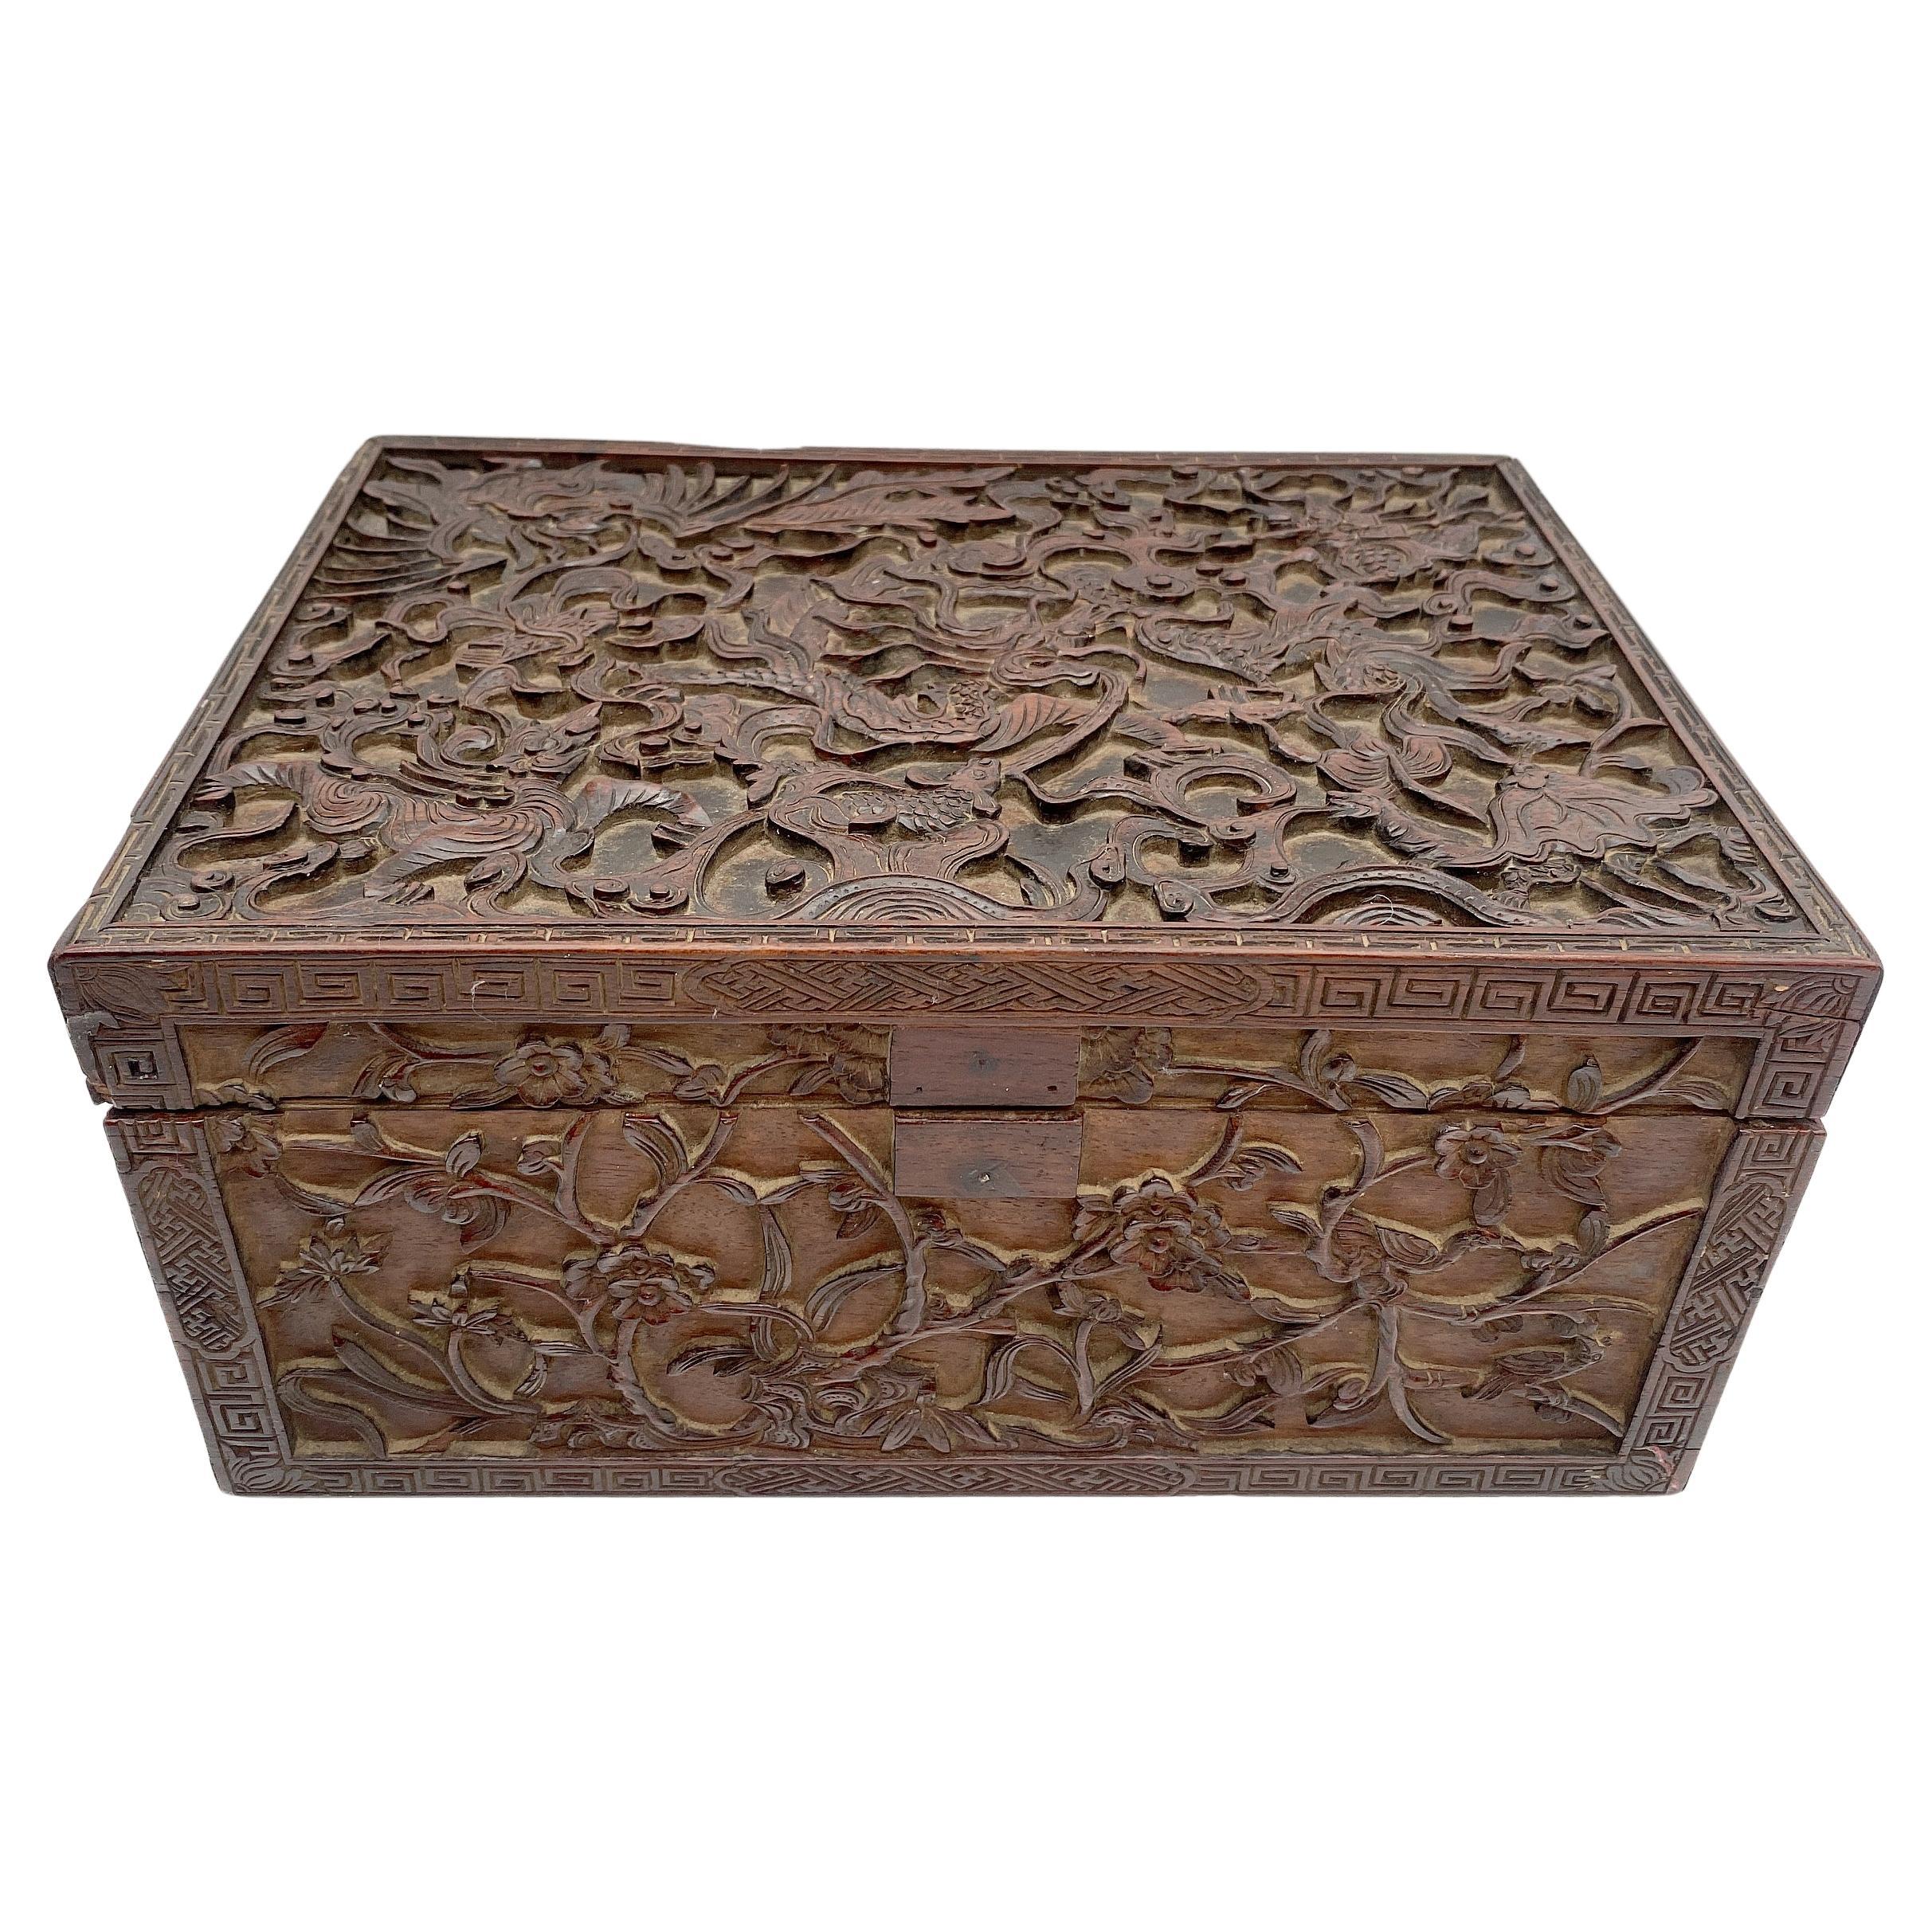 19th Century Chinese Wooden Rectangular 'Mythical Beasts' Box For Sale